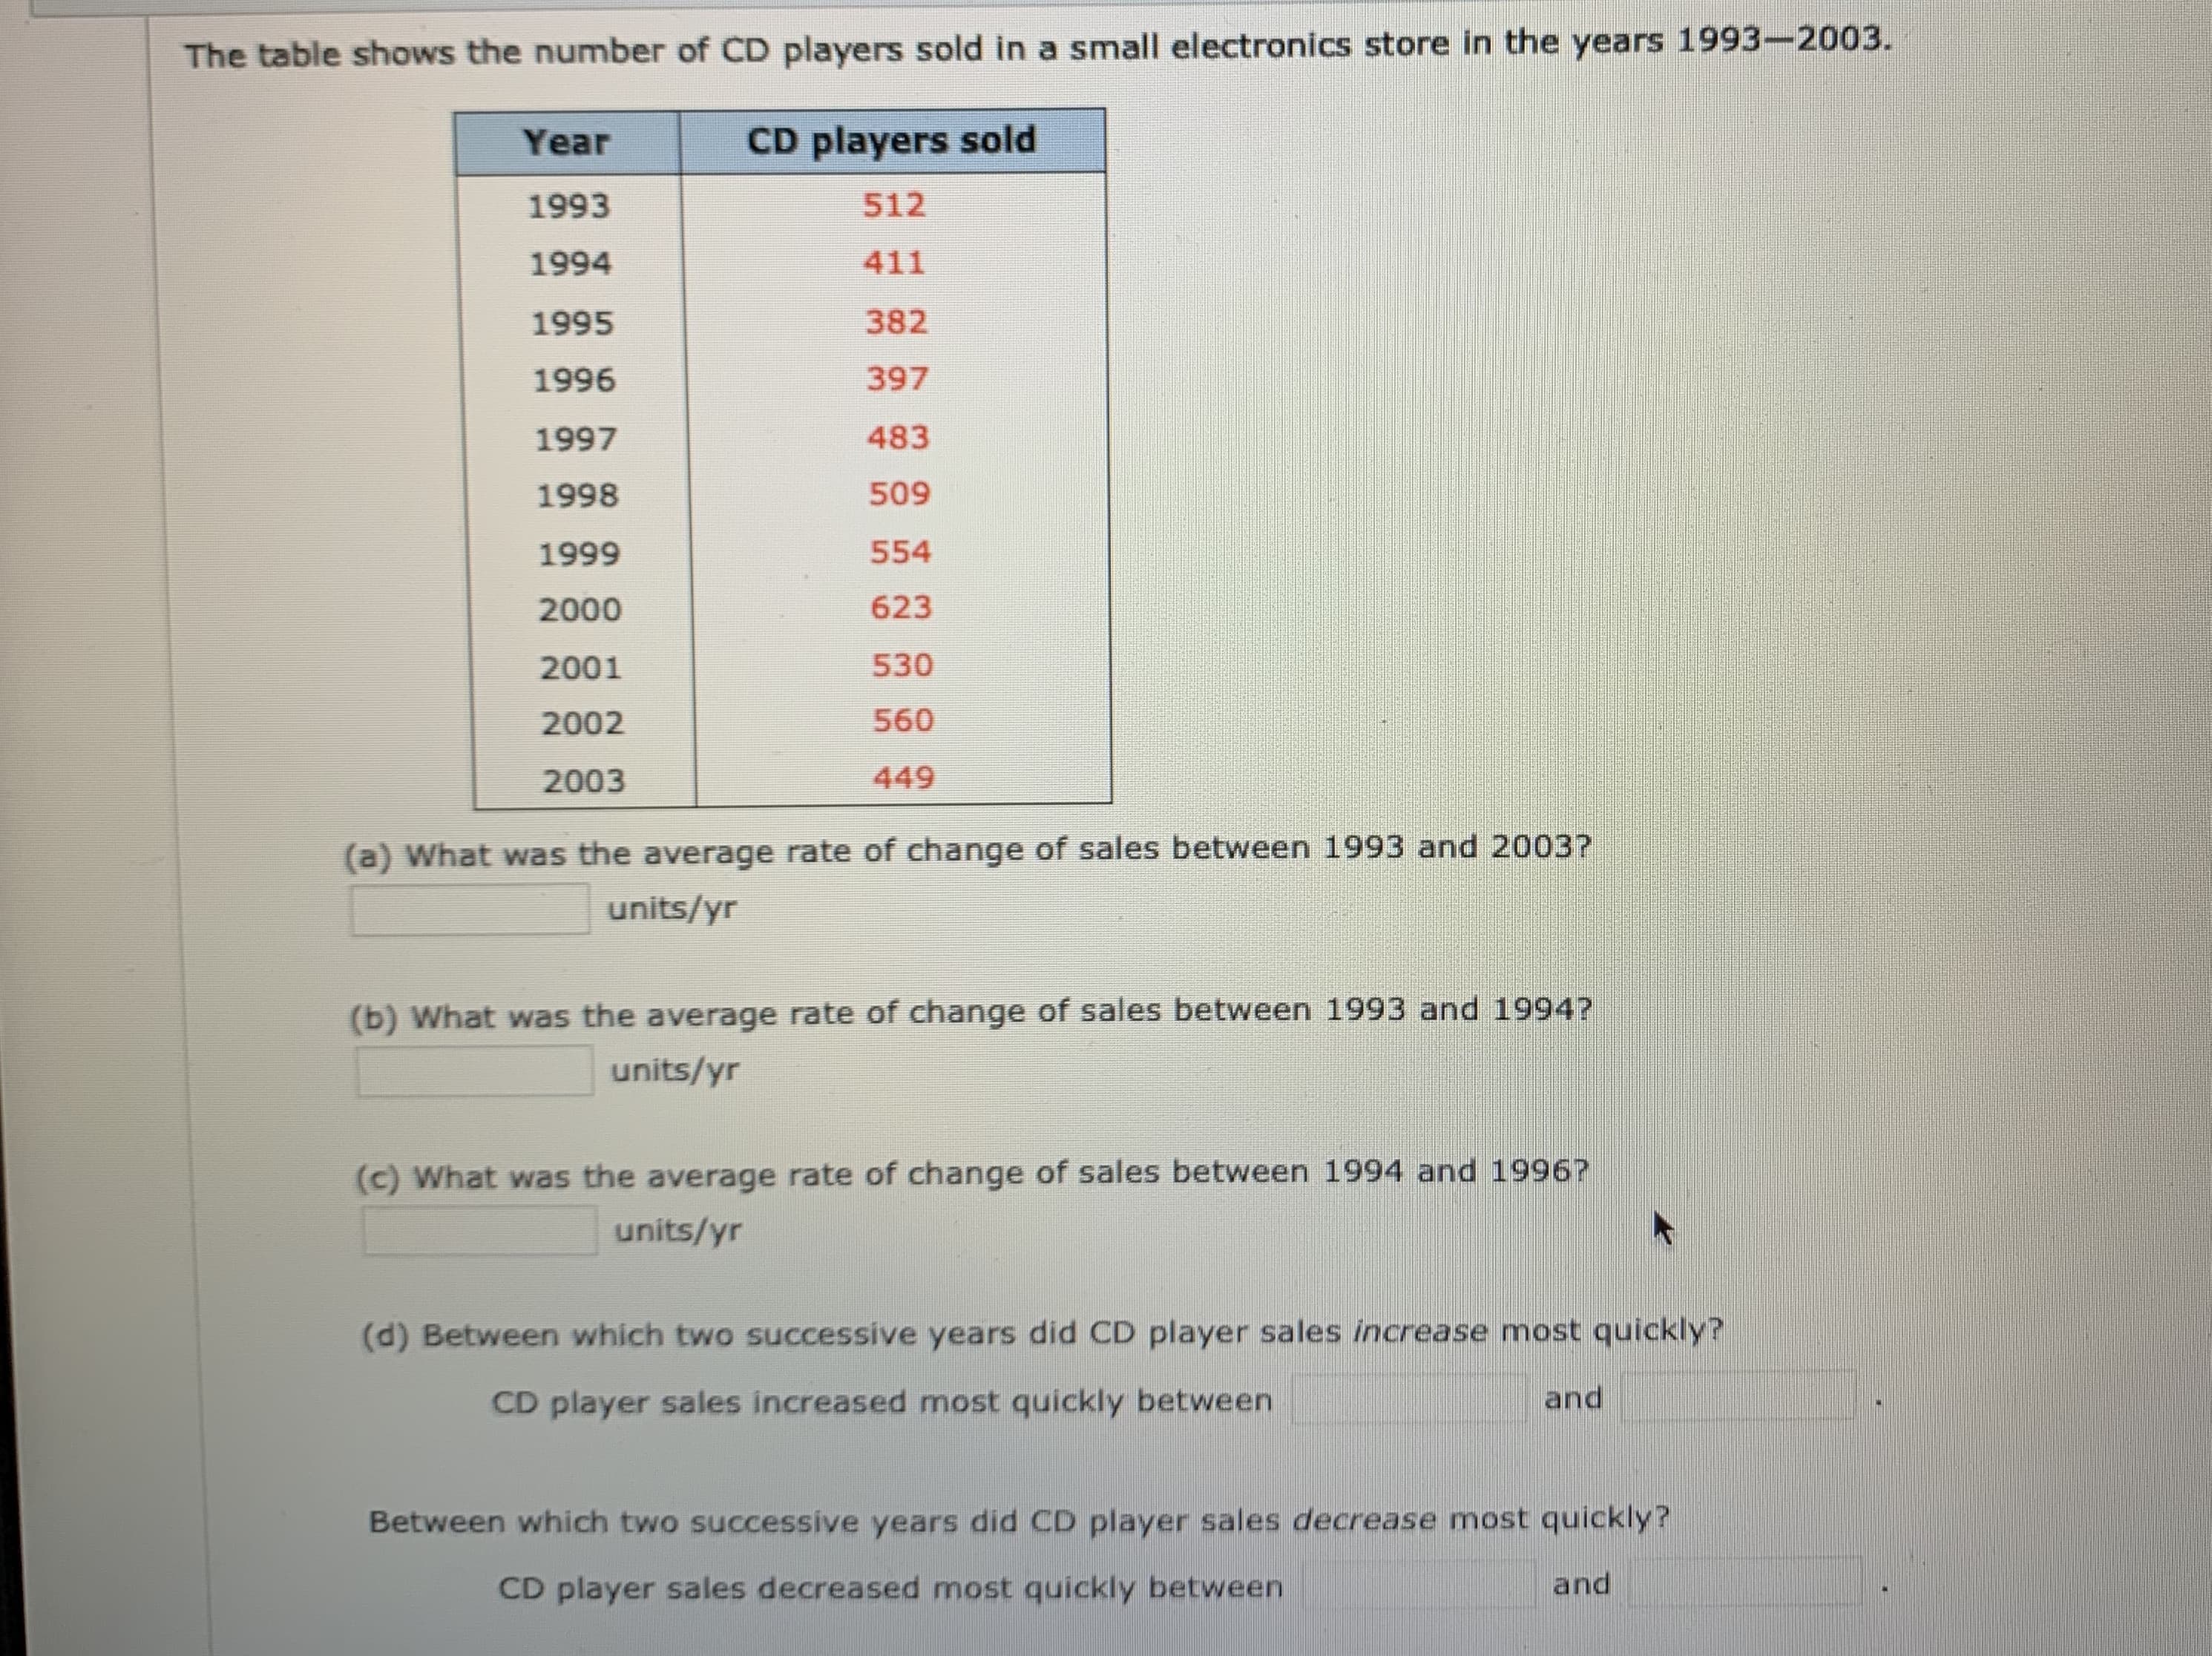 The table shows the number of CD players sold in a small electronics store in the years 1993-2003.
CD players sold
Year
512
1993
411
1994
382
1995
397
1996
483
1997
509
1998
1999
554
623
2000
530
2001
560
2002
449
2003
(a) What was the average rate of change of sales between 1993 and 2003?
units/yr
(b) What was the average rate of change of sales between 1993 and 1994?
units/yr
(c) What was the average rate of change of sales between 1994 and 19967
units/yr
(d) Between which two successive years did CD player sales increase most quickly?
and
CD player sales increased most quickly between
Between which two successive years did CD player sales decrease most quickly?
CD player sales decreased most quickly between
and
